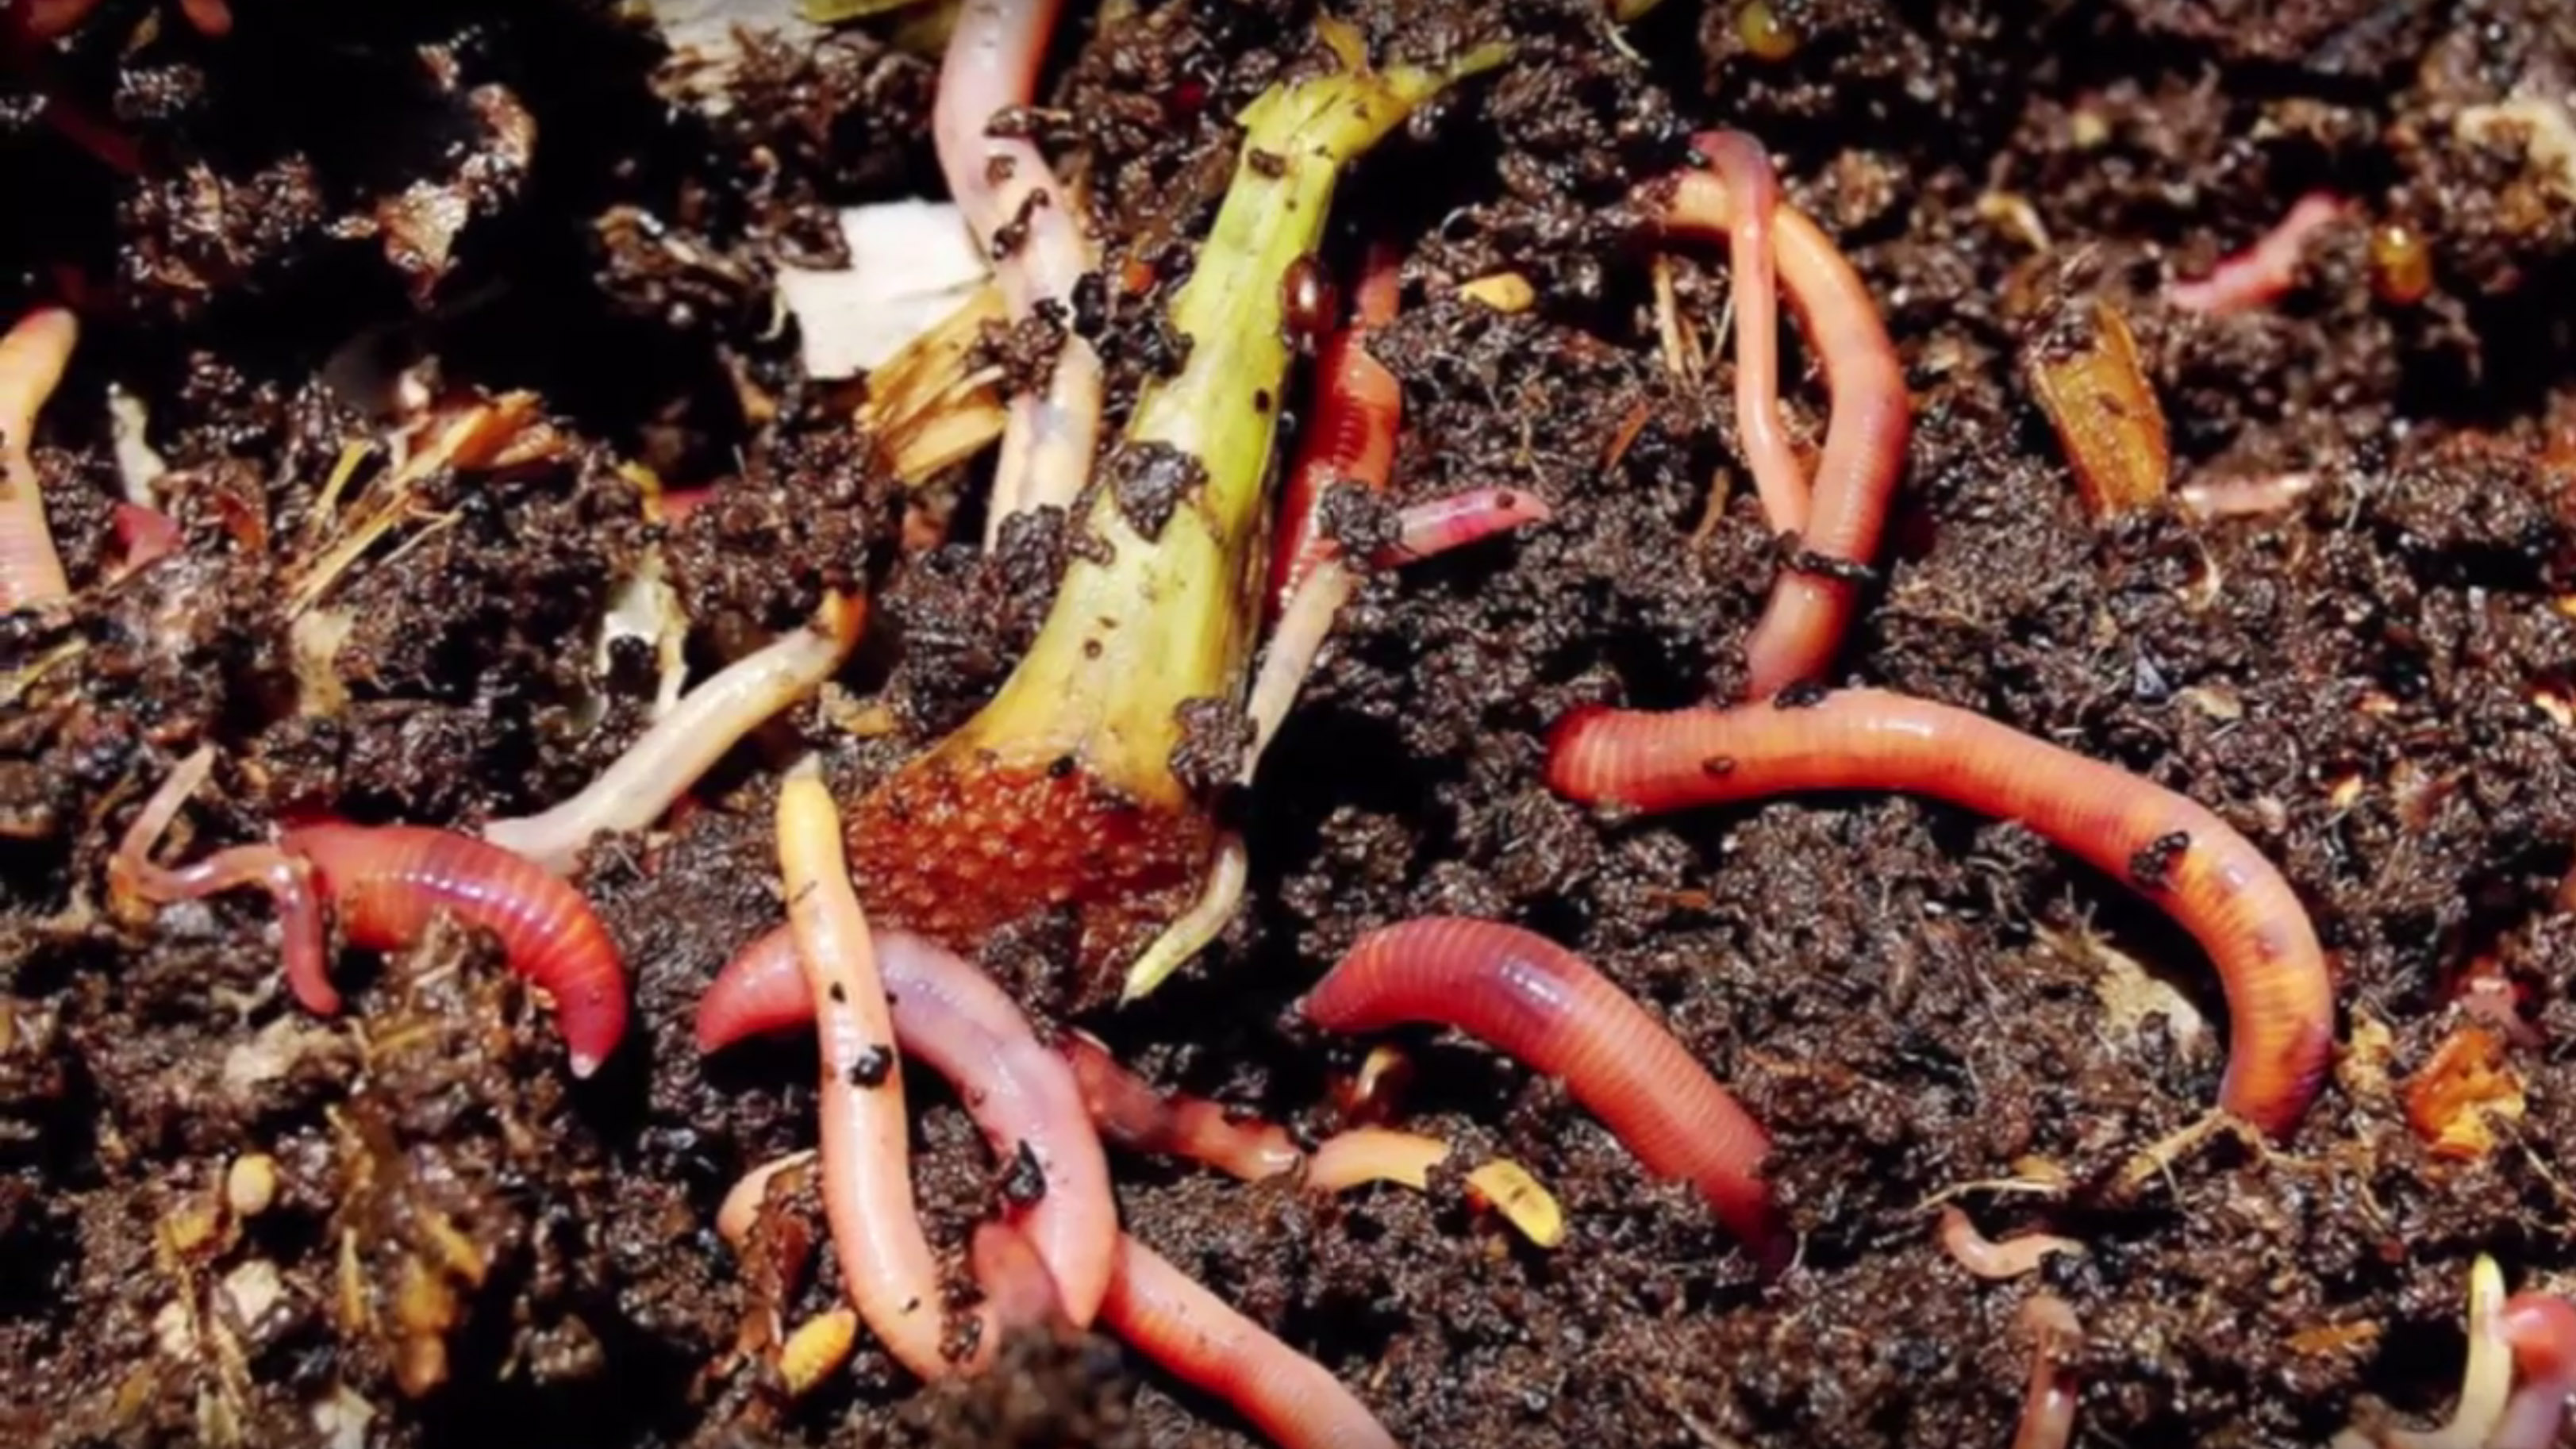 Worms in a compost bin with food scraps and soil